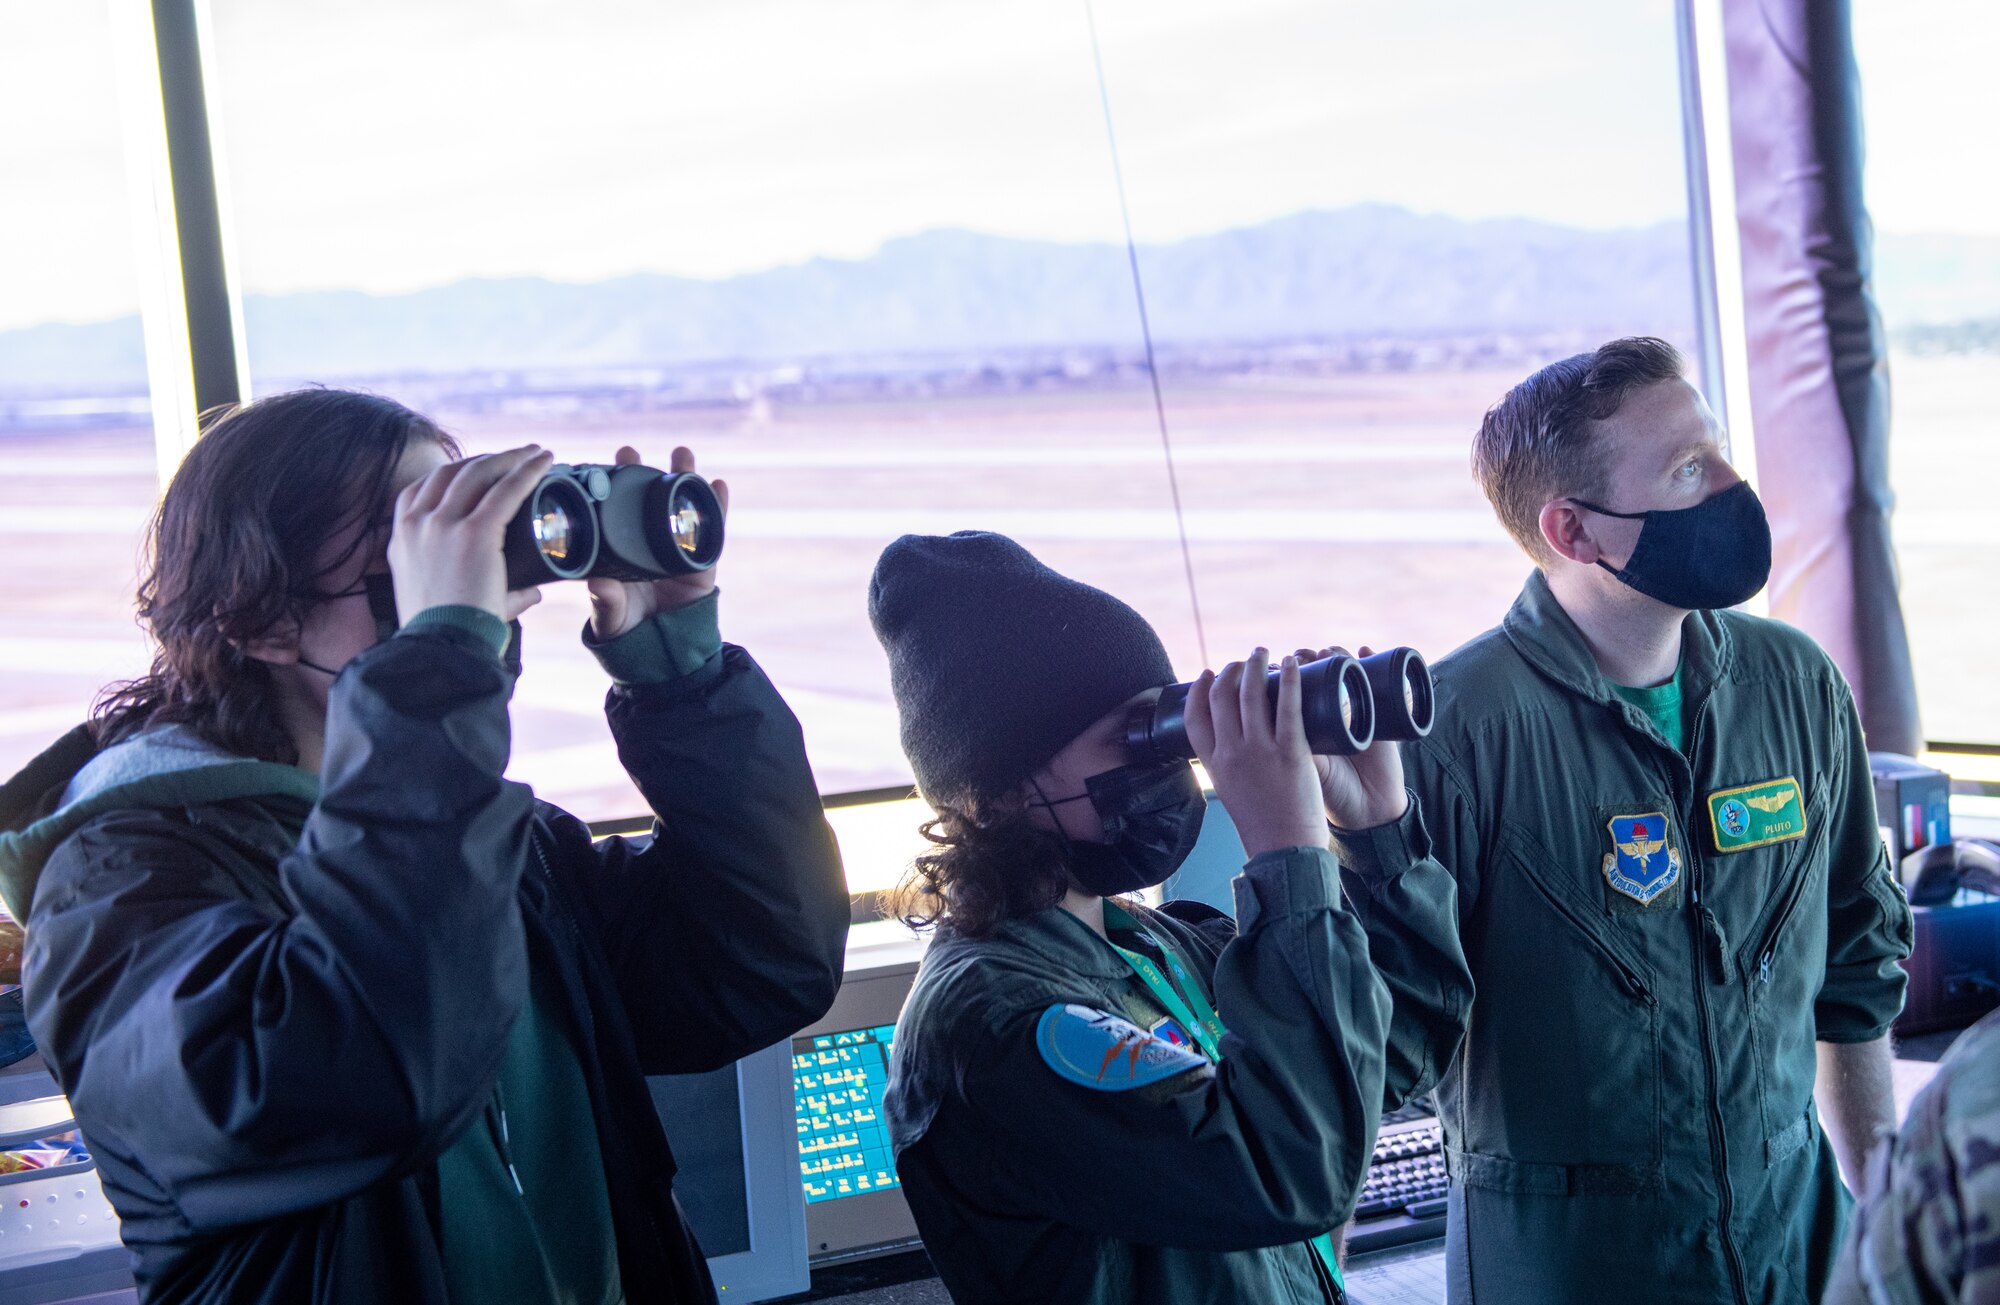 Ian “Monky Warrior” Brito (center), Pilot for a Day participant, looks out at the flightline from the Air Traffic Control tower Feb. 25, 2022, at Luke Air Force Base, Arizona.